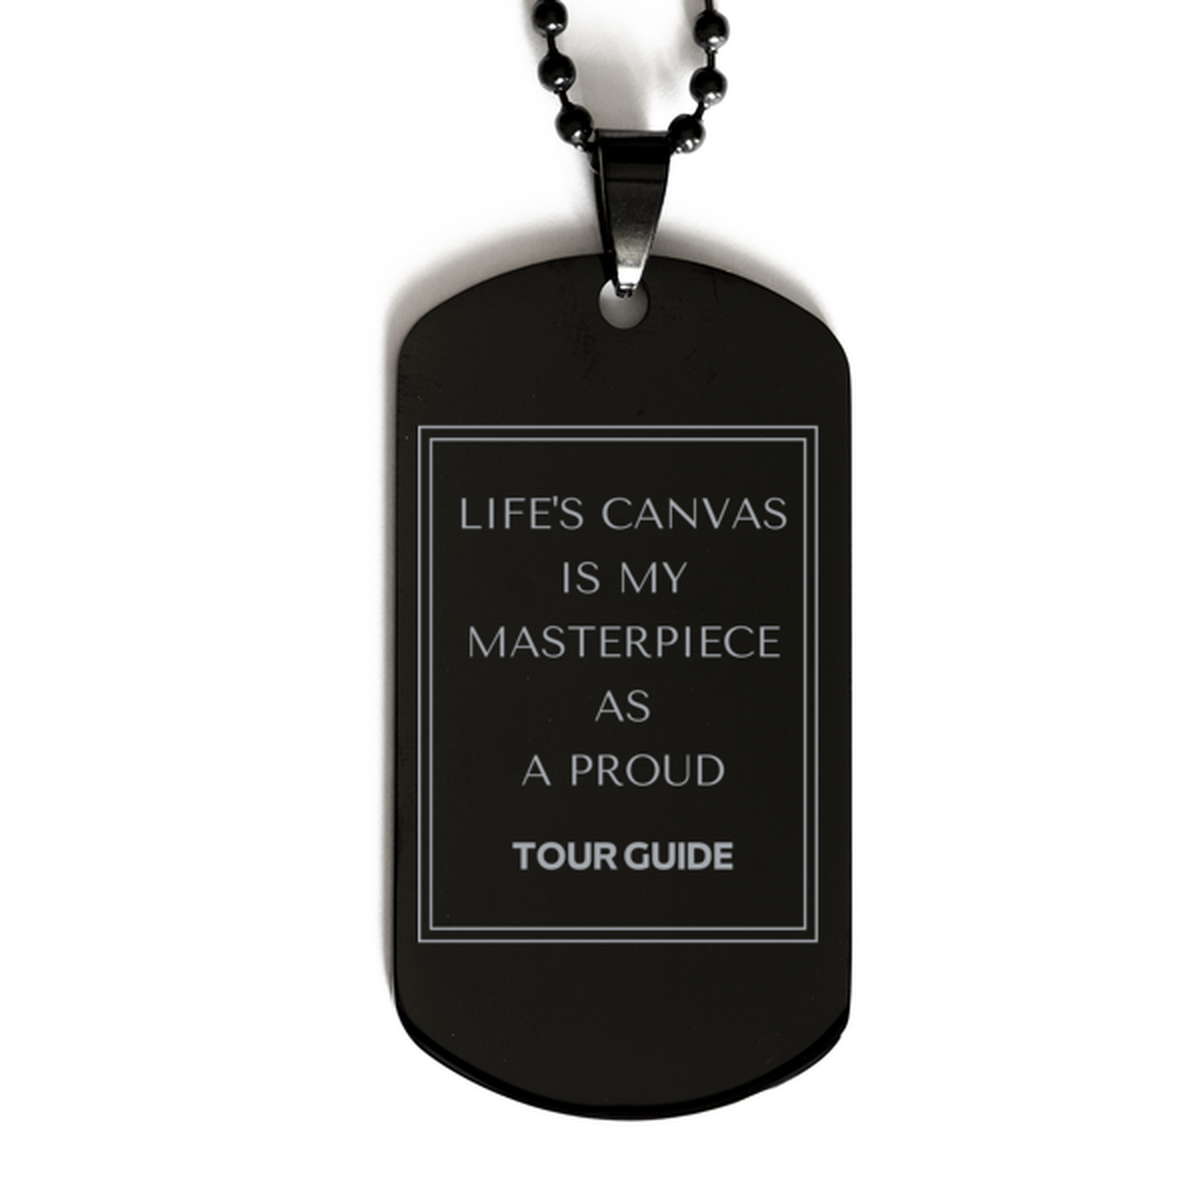 Proud Tour Guide Gifts, Life's canvas is my masterpiece, Epic Birthday Christmas Unique Black Dog Tag For Tour Guide, Coworkers, Men, Women, Friends